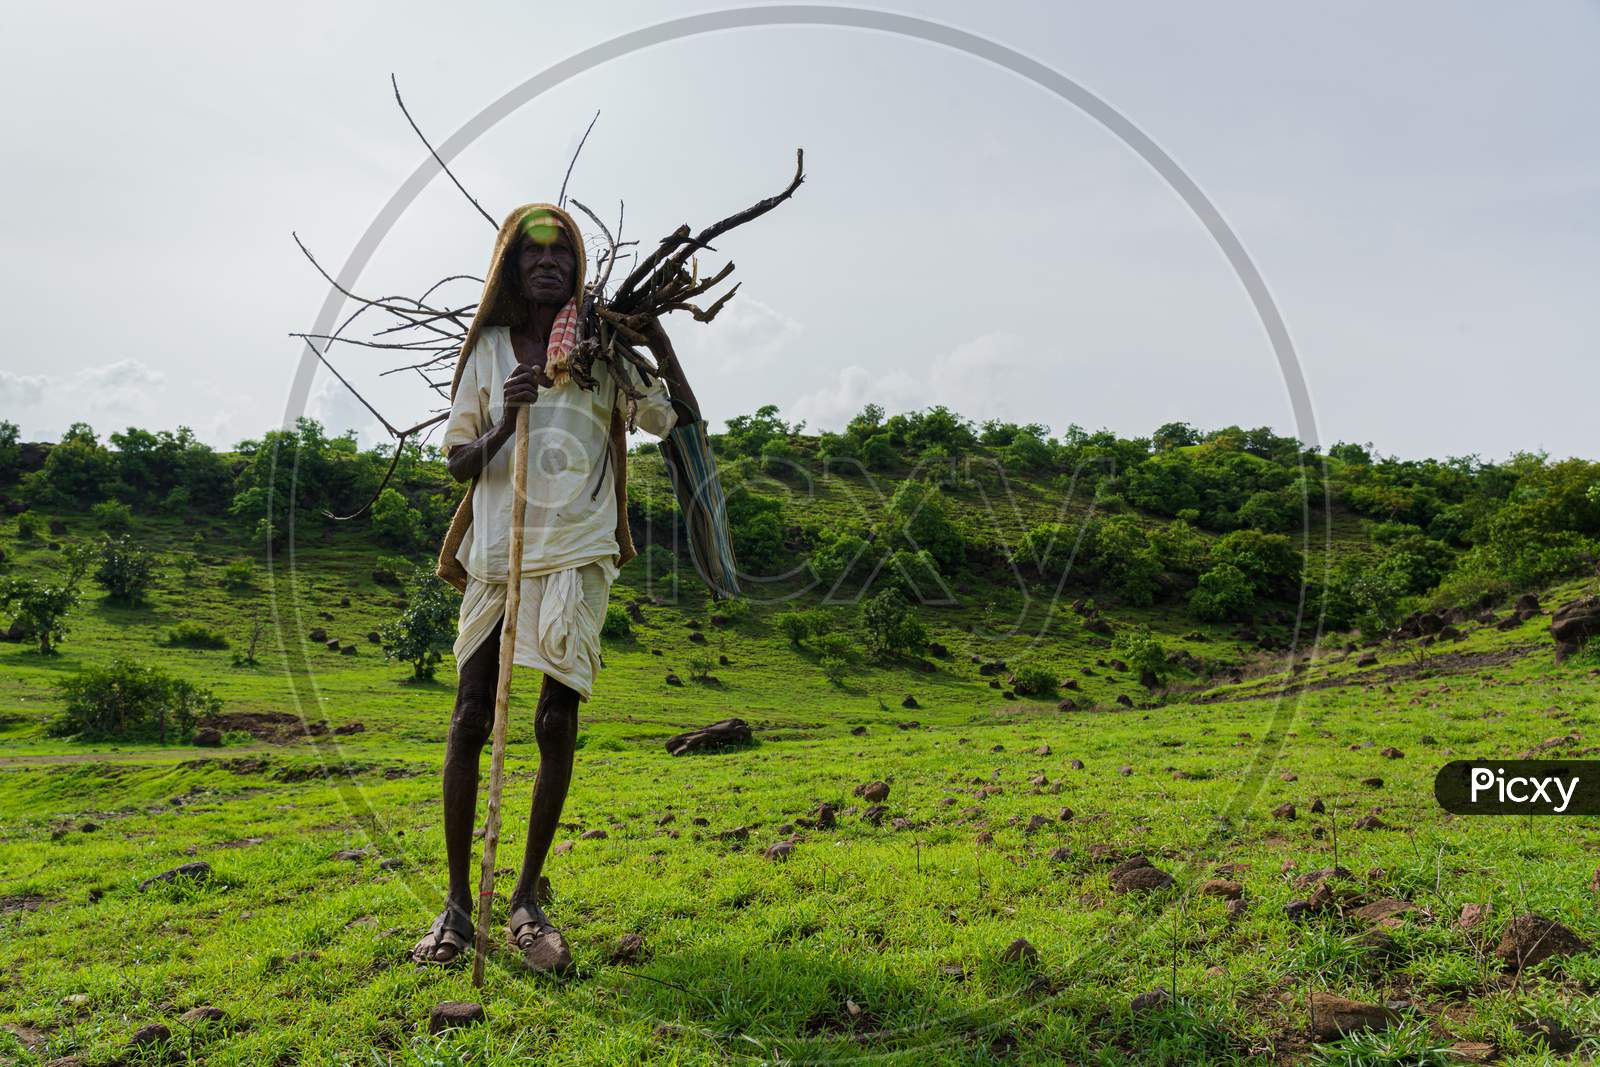 Old Man Carrying sticks for his daily needs in greenfields of vikarabad